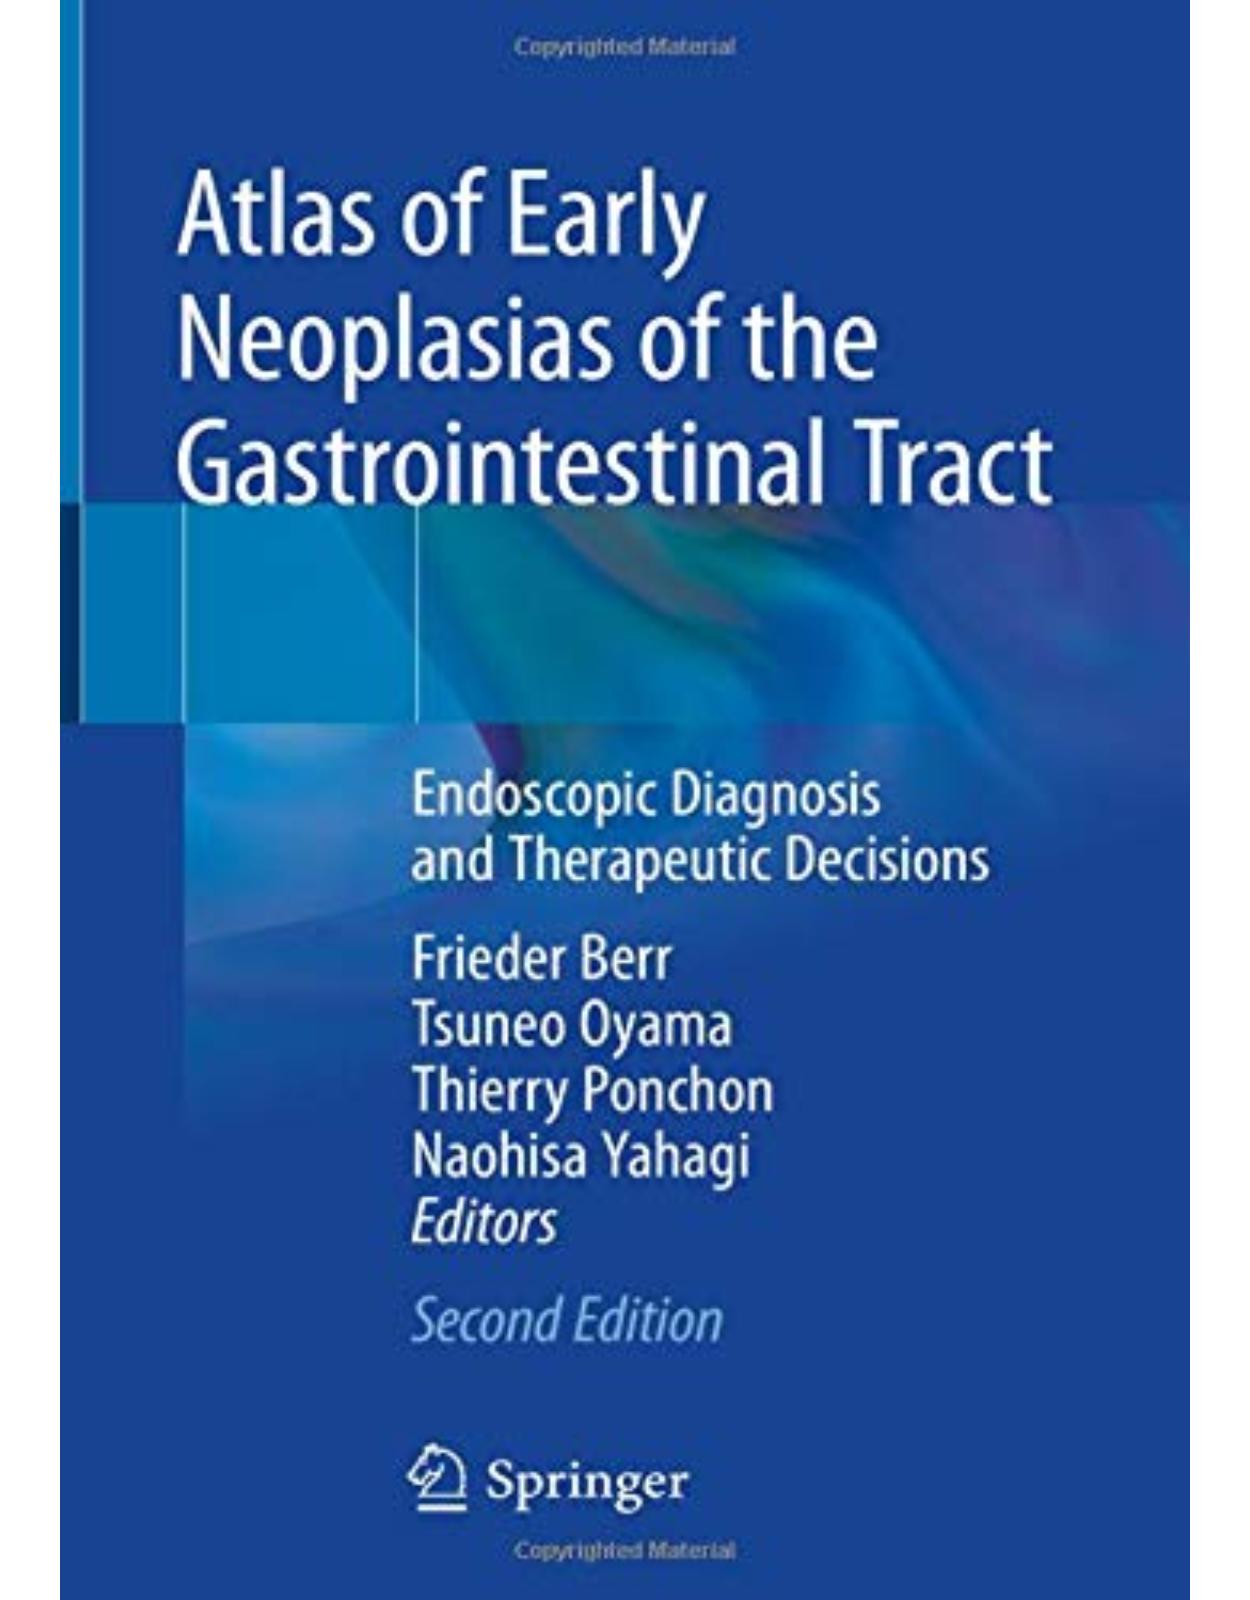 Atlas of Early Neoplasias of the Gastrointestinal Tract: Endoscopic Diagnosis and Therapeutic Decisions 